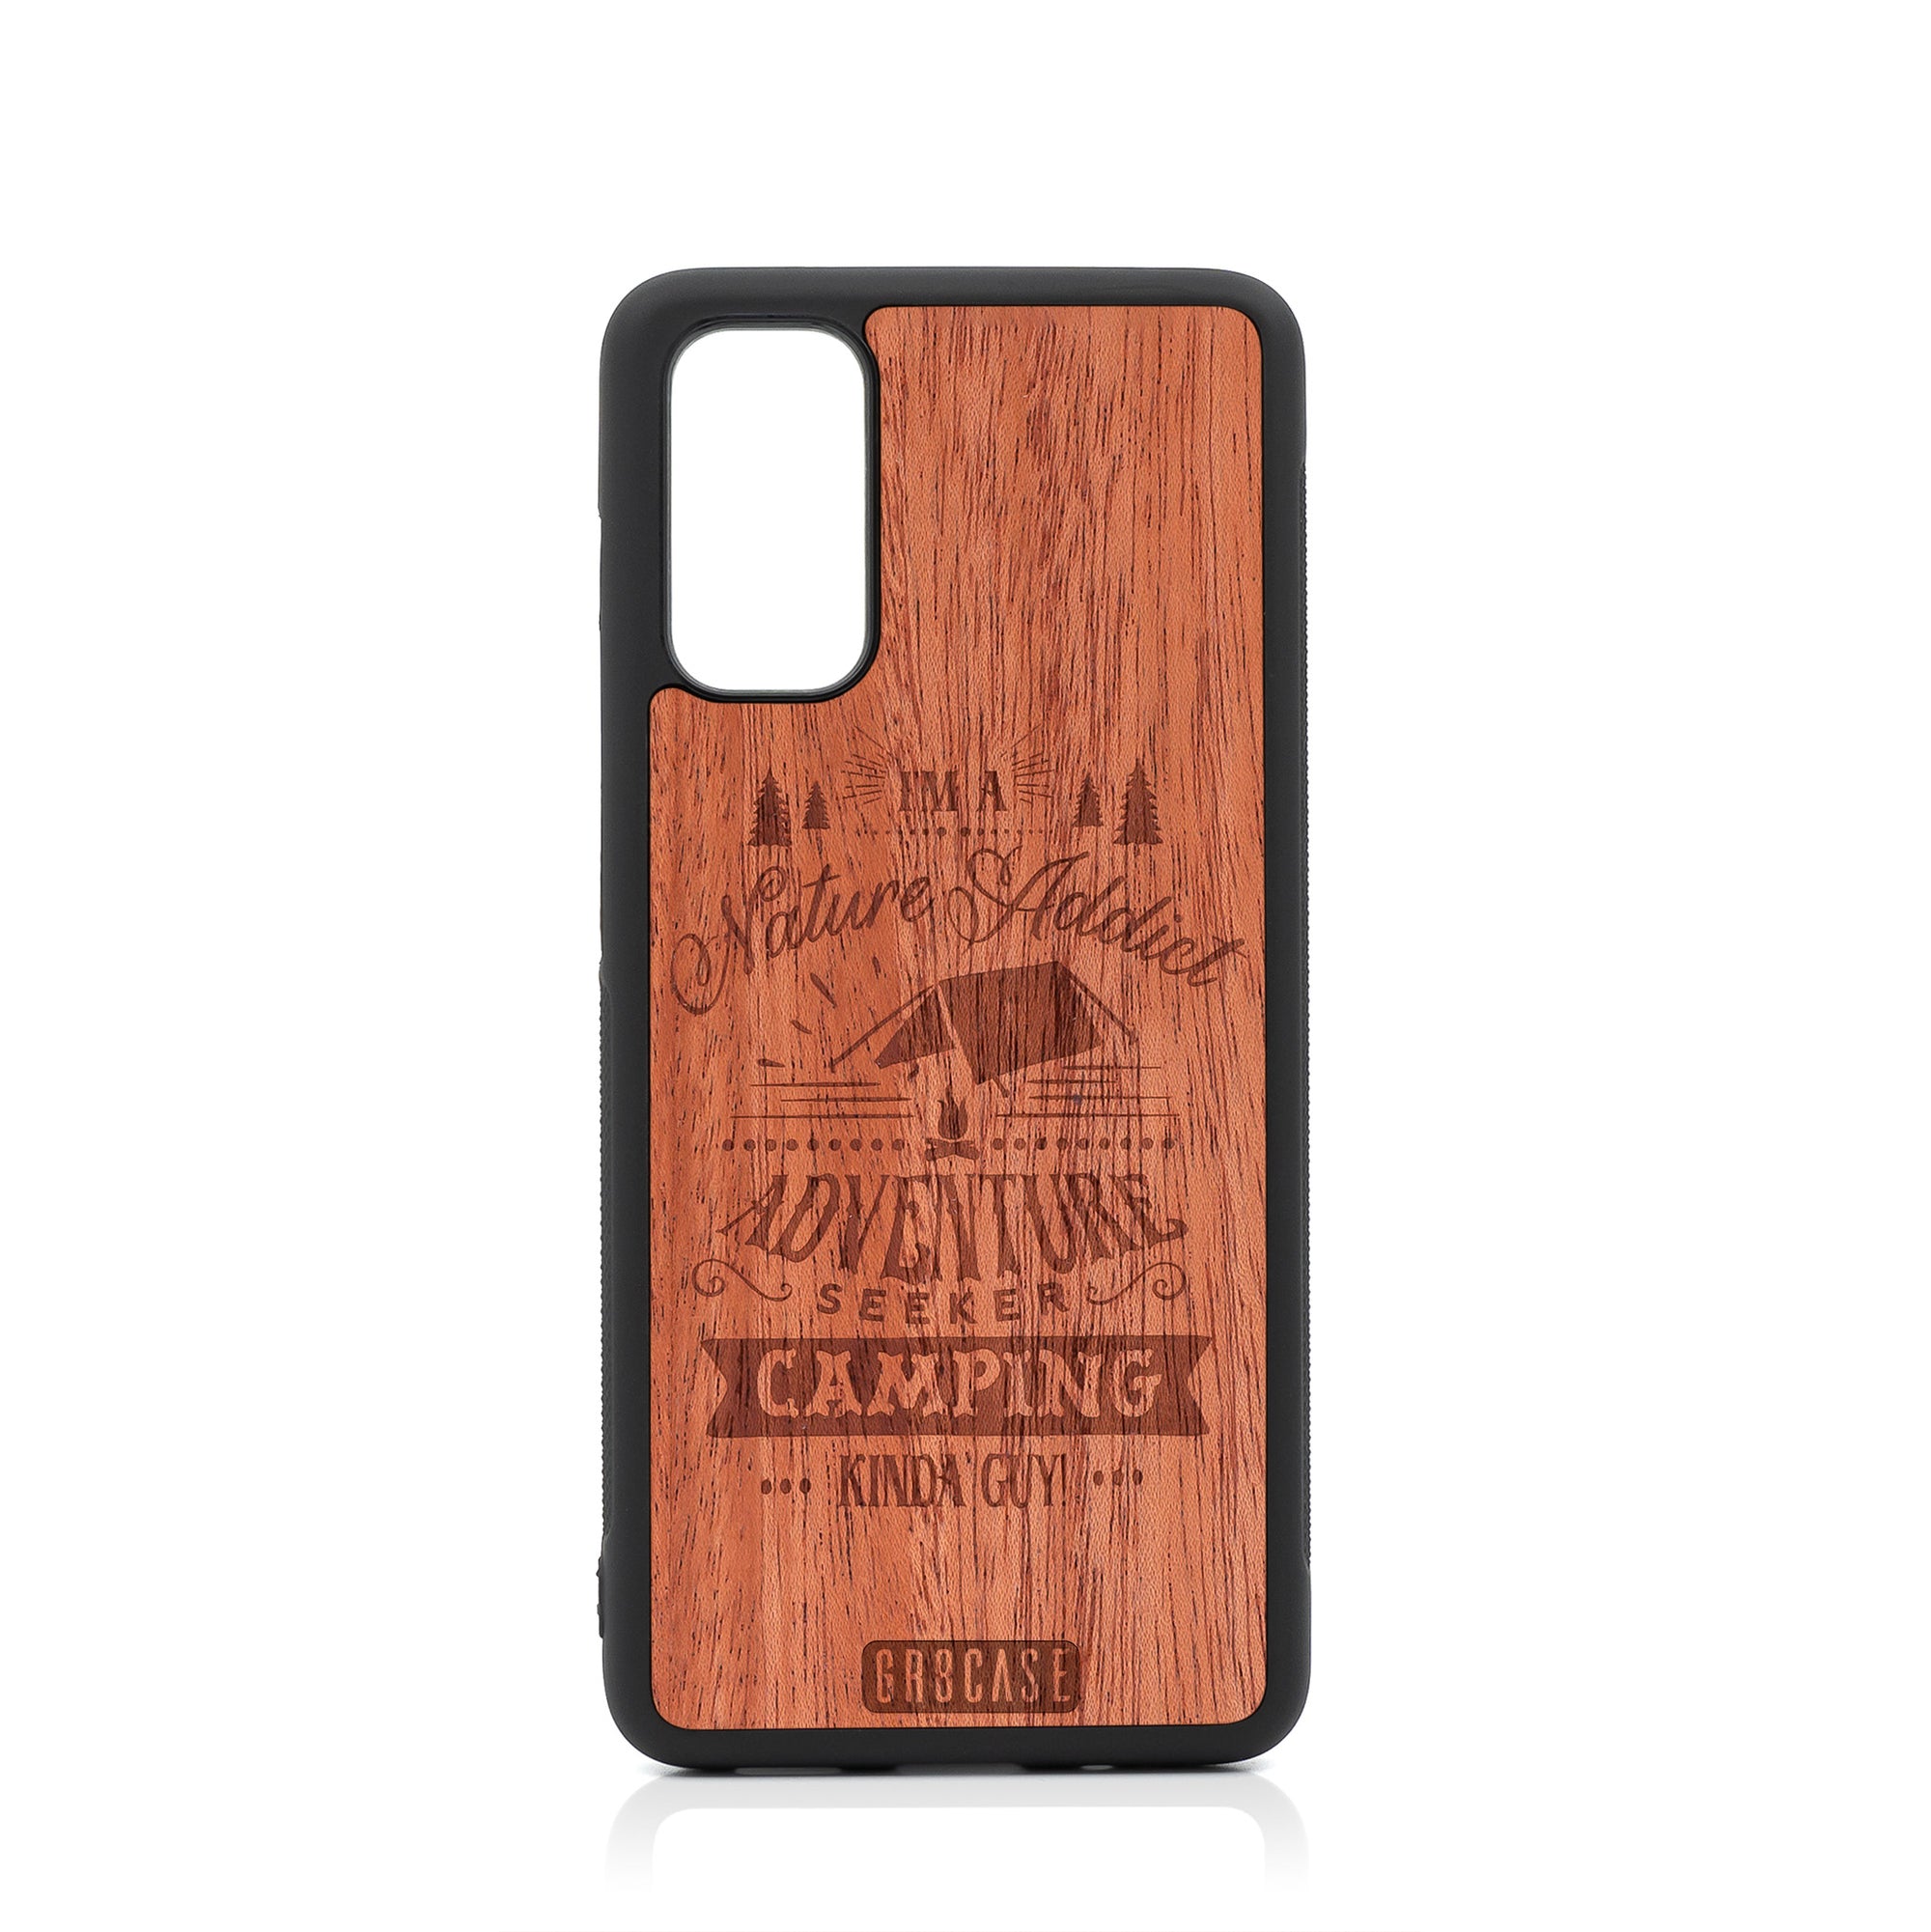 I'm A Nature Addict Adventure Seeker Camping Kinda Guy Design Wood Case For Samsung Galaxy S20 by GR8CASE